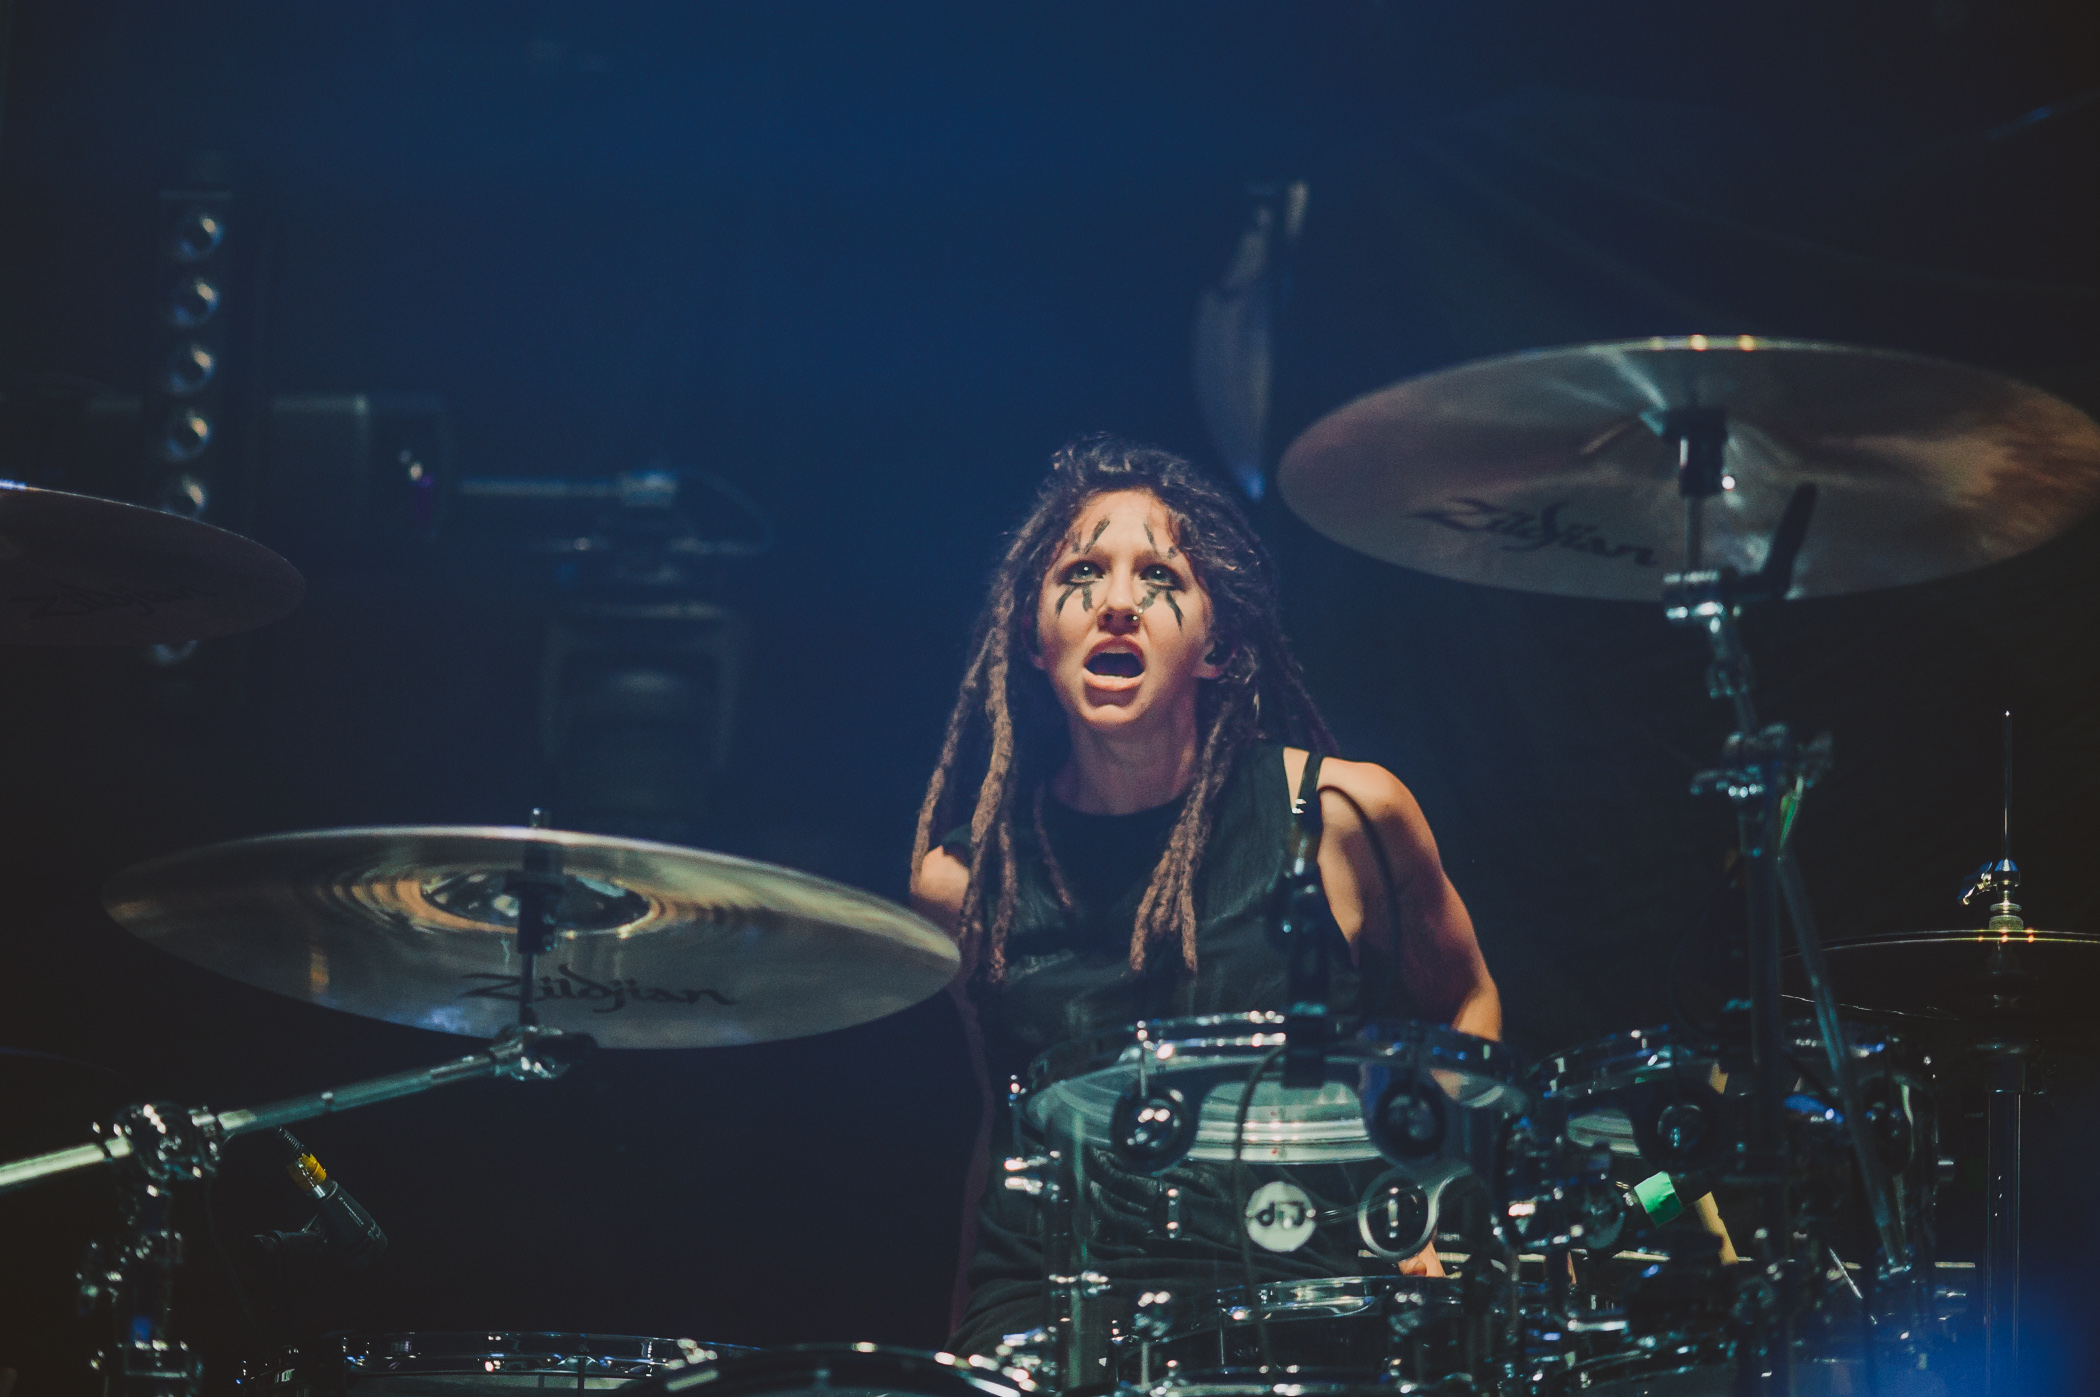 3_The_Dead_Deads-Abbotsford_Centre-Timothy_Nguyen-20180127 (15 of 15).jpg